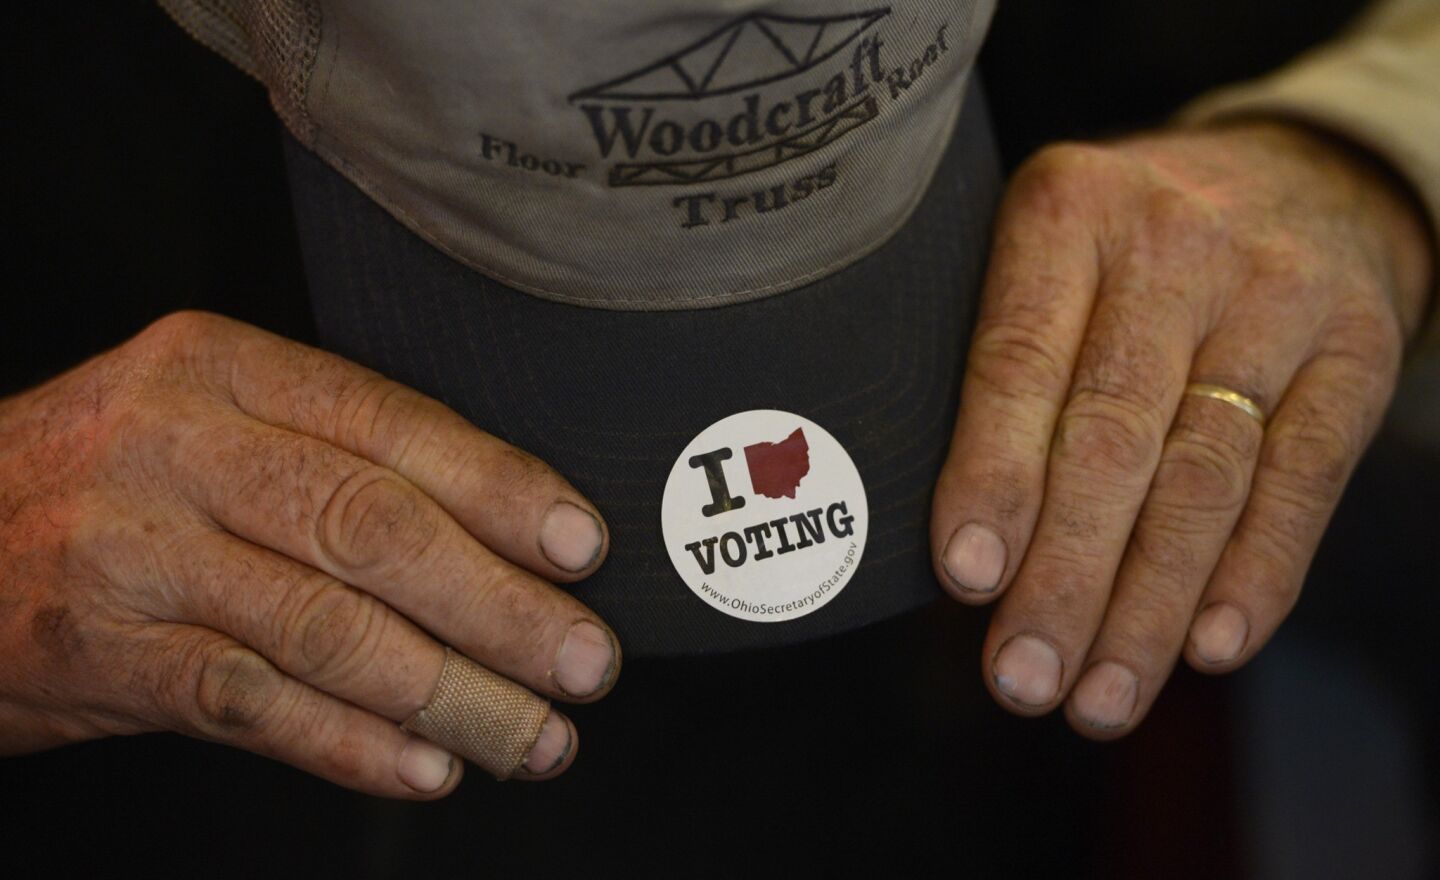 The hands of Sam Martin show off the sticker he received after voting early last week. Martin gathered with others on election day for breakfast in the Nutcracker Restaurant, a 1950s style diner in Pataskala, Ohio.